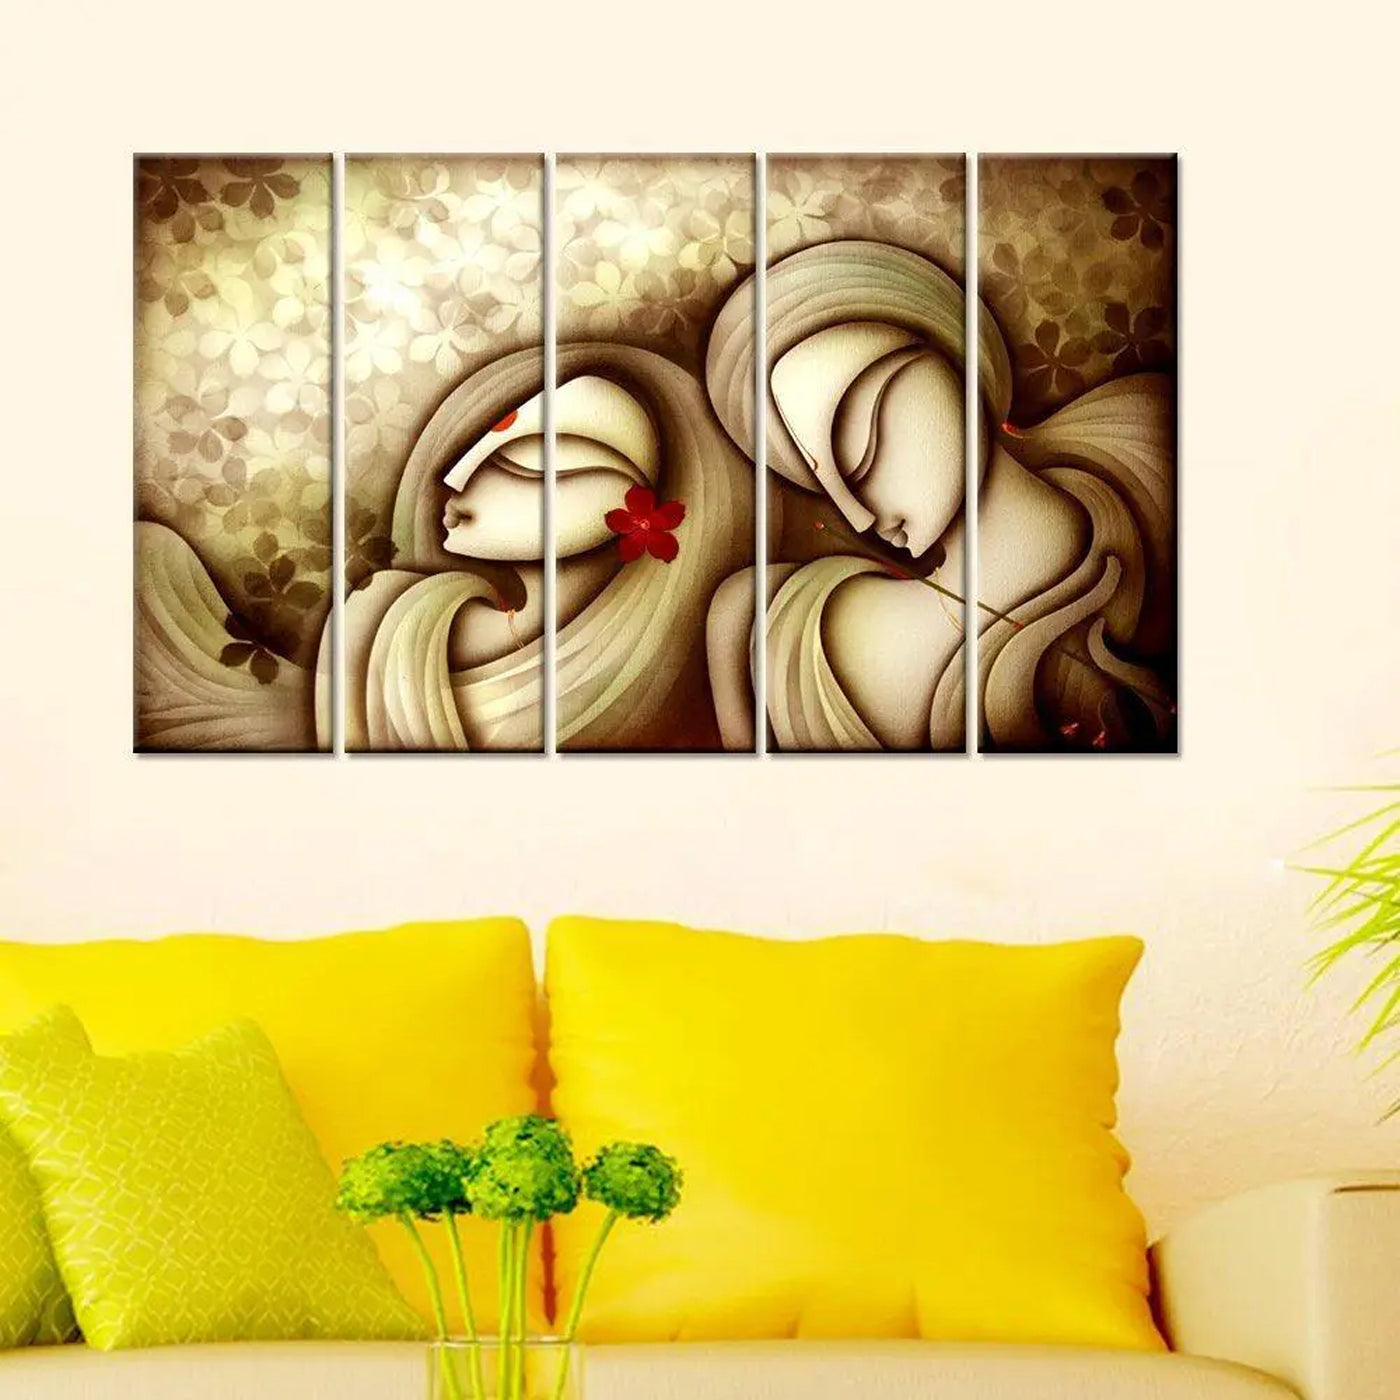 Sand Art Work Captured in Canvas Wall Painting